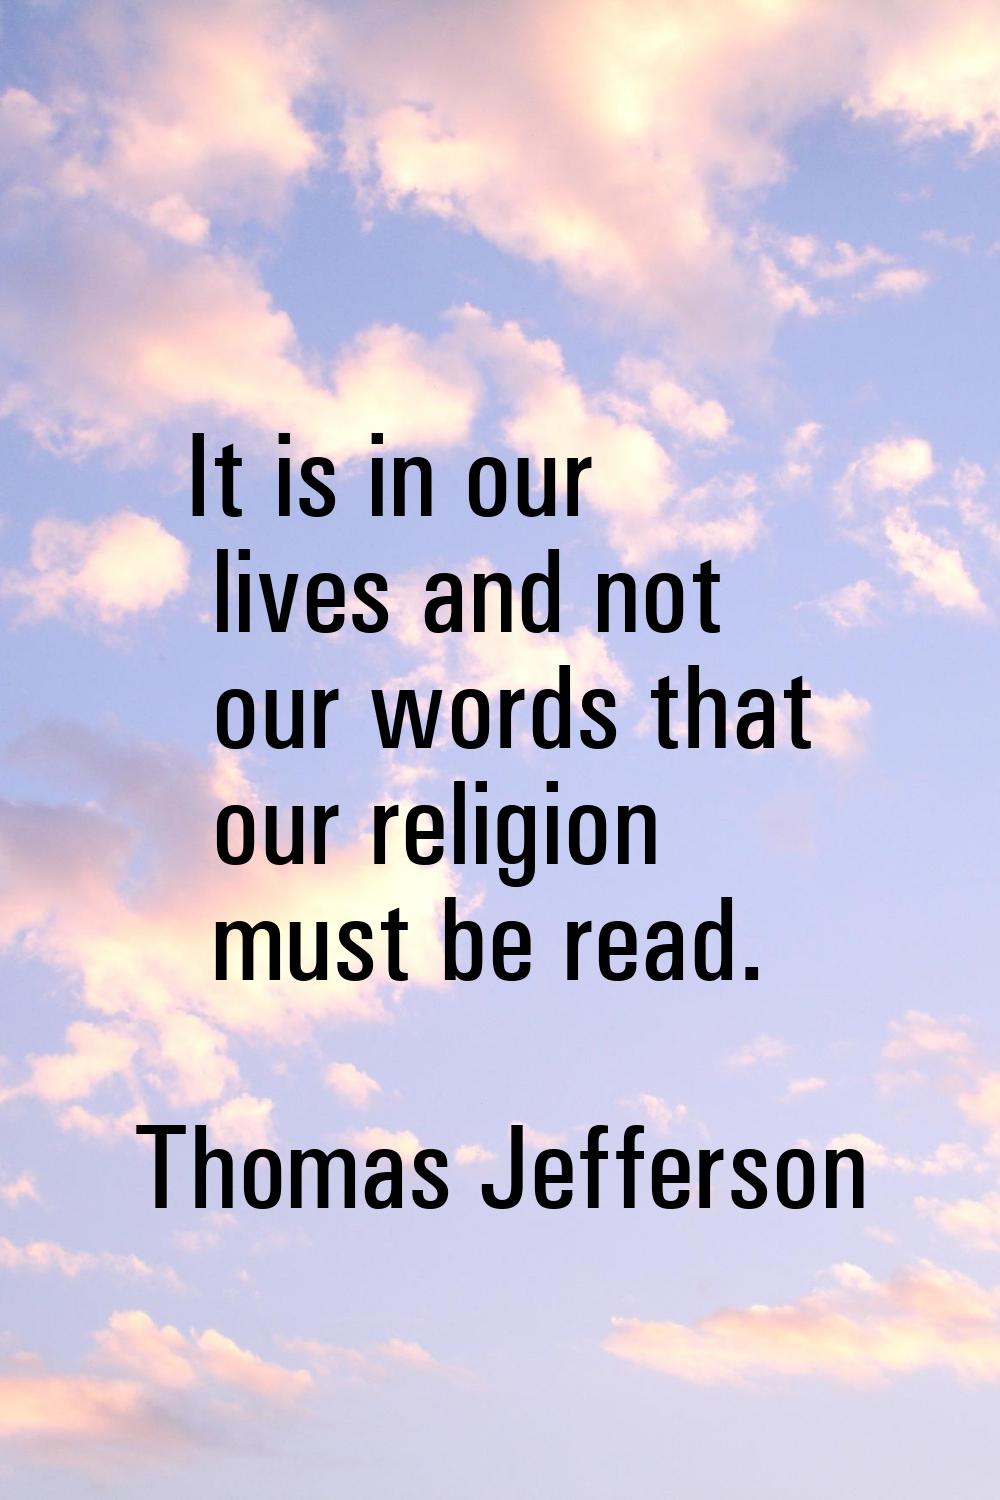 It is in our lives and not our words that our religion must be read.